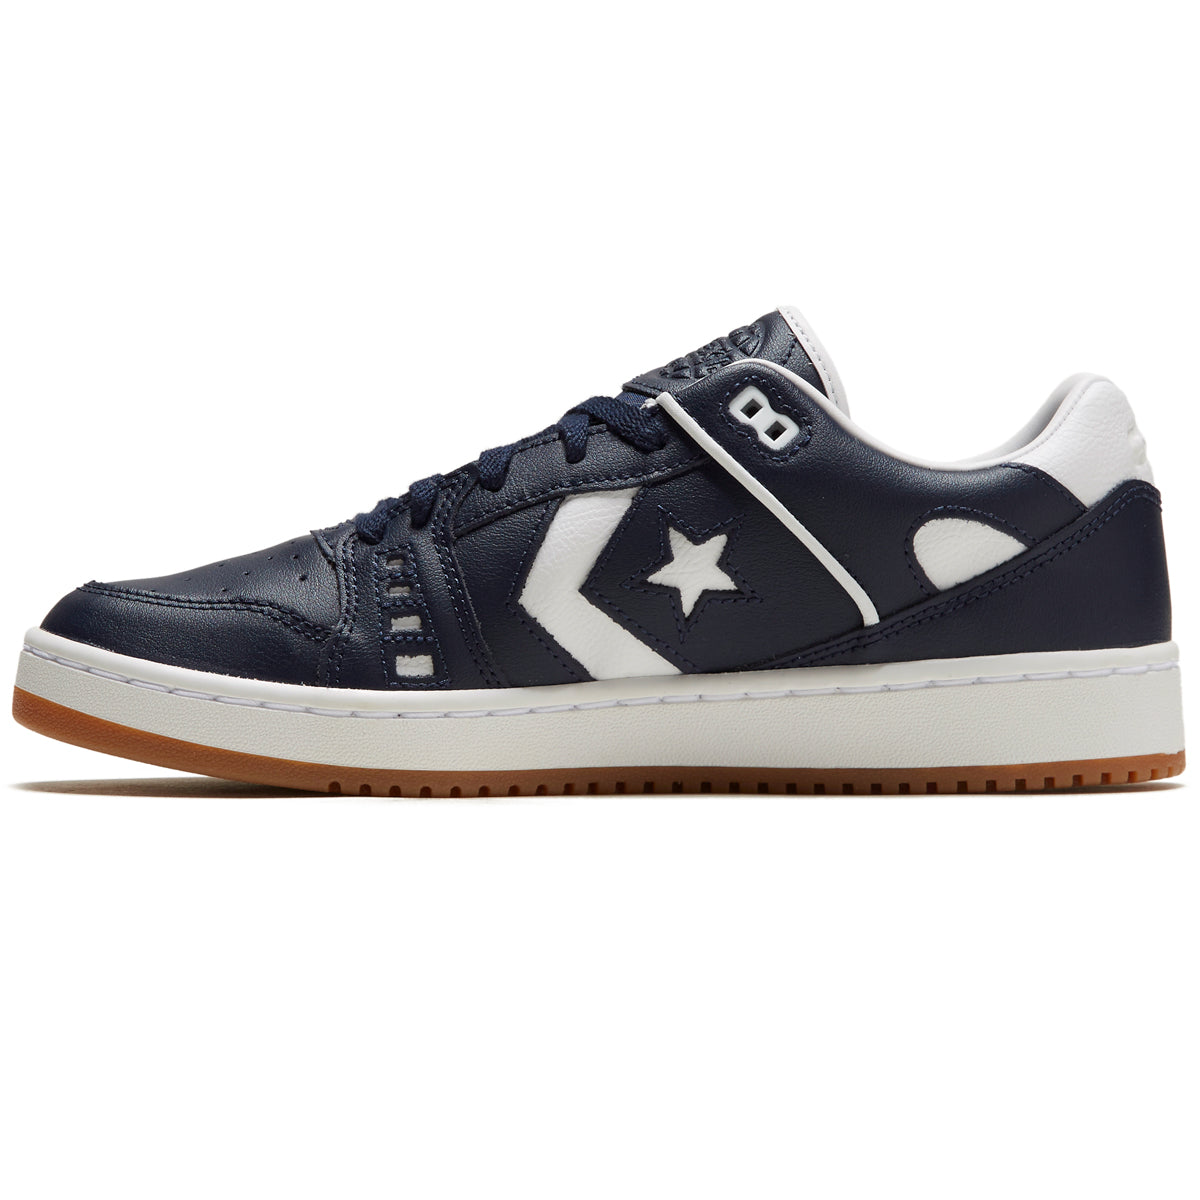 Converse AS-1 Pro Ox Shoes - Obsidian/White/Gum image 2